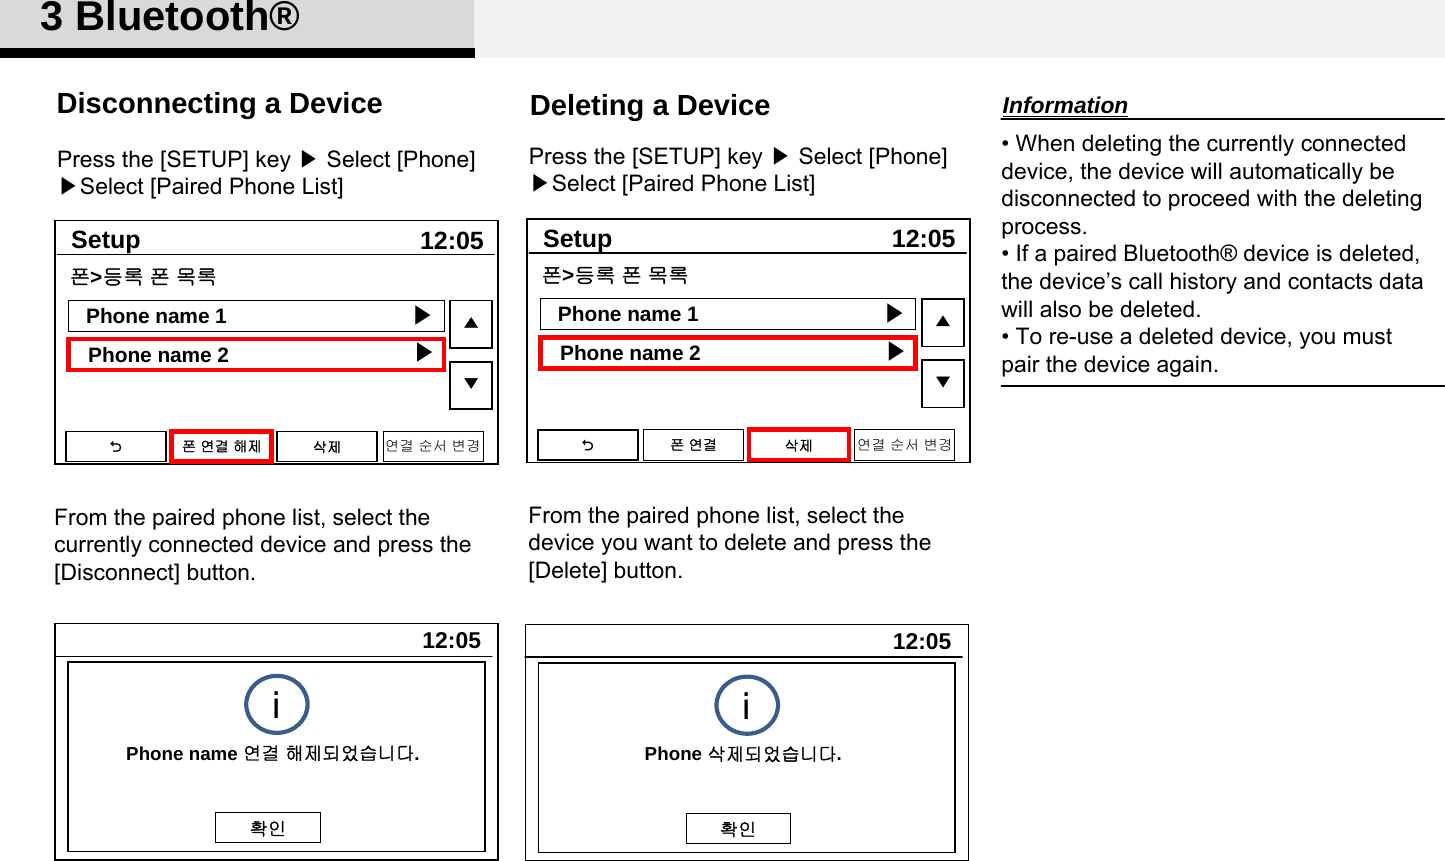 3 Bluetooth®From the paired phone list, select thecurrently connected device and press the [Disconnect] button.Disconnecting a Device• When deleting the currently connected device, the device will automatically be disconnected to proceed with the deleting process. • If a paired Bluetooth® device is deleted, the device’s call history and contacts data will also be deleted.• To re-use a deleted device, you must pair the device again. From the paired phone list, select thedevice you want to delete and press the[Delete] button.InformationDeleting a DevicePress the [SETUP] key ▶Select [Phone] ▶Select [Paired Phone List]Press the [SETUP] key ▶Select [Phone] ▶Select [Paired Phone List]12:05SetupPhone name 1Phone name 2▲▼폰&gt;등록 폰 목록▶▶폰연결해제 삭제 연결 순서 변경12:05SetupPhone name 1Phone name 2▲▼폰&gt;등록 폰 목록▶▶폰연결 삭제 연결 순서 변경12:05트랙 01Phone 삭제되었습니다.확인i12:05트랙 01Phone name 연결 해제되었습니다.확인i